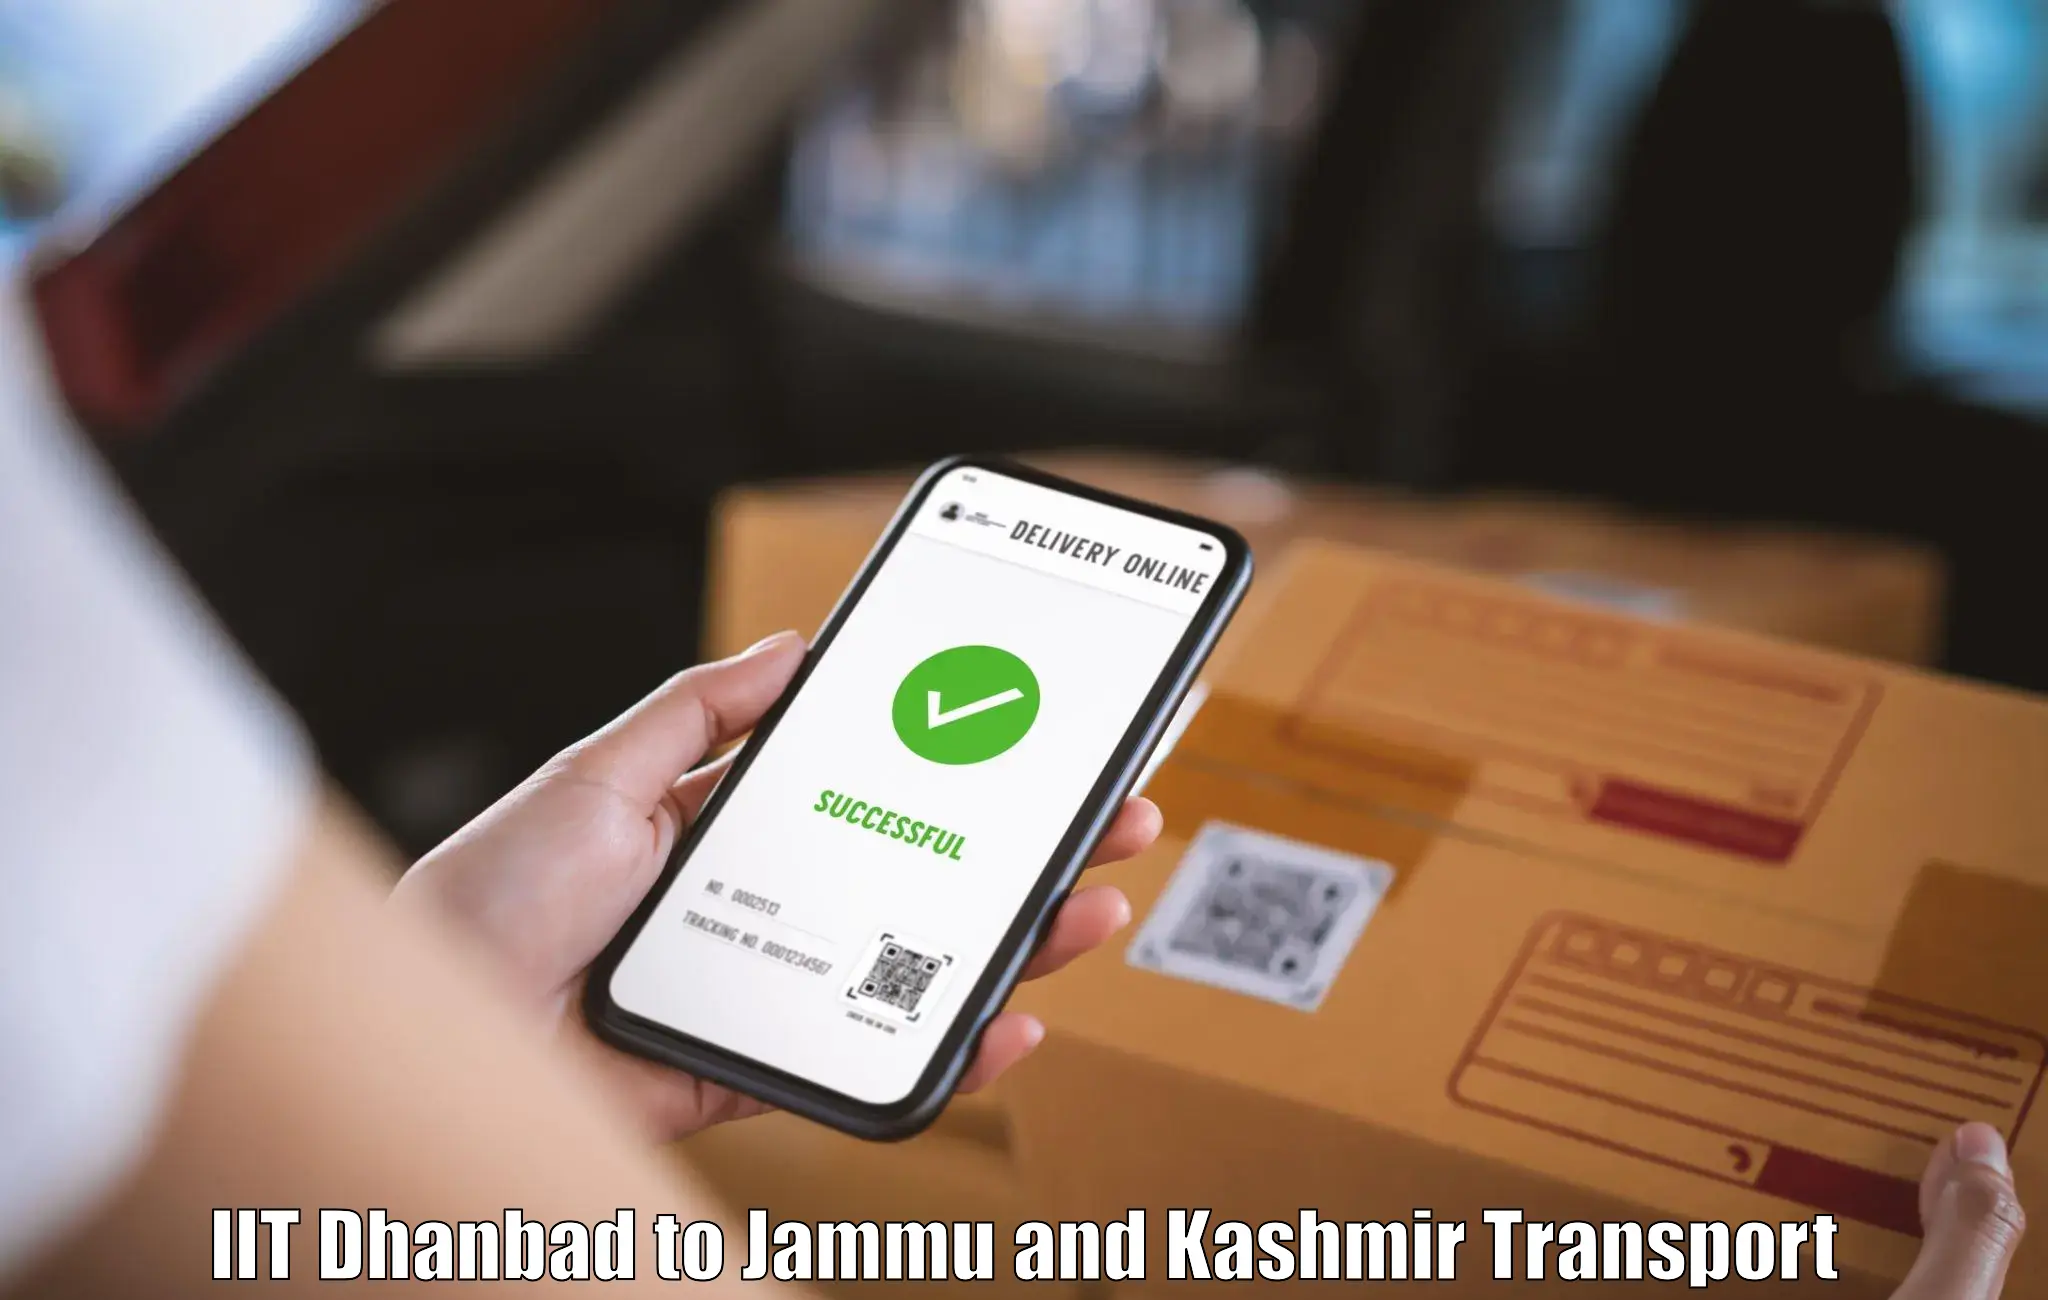 Furniture transport service in IIT Dhanbad to Budgam